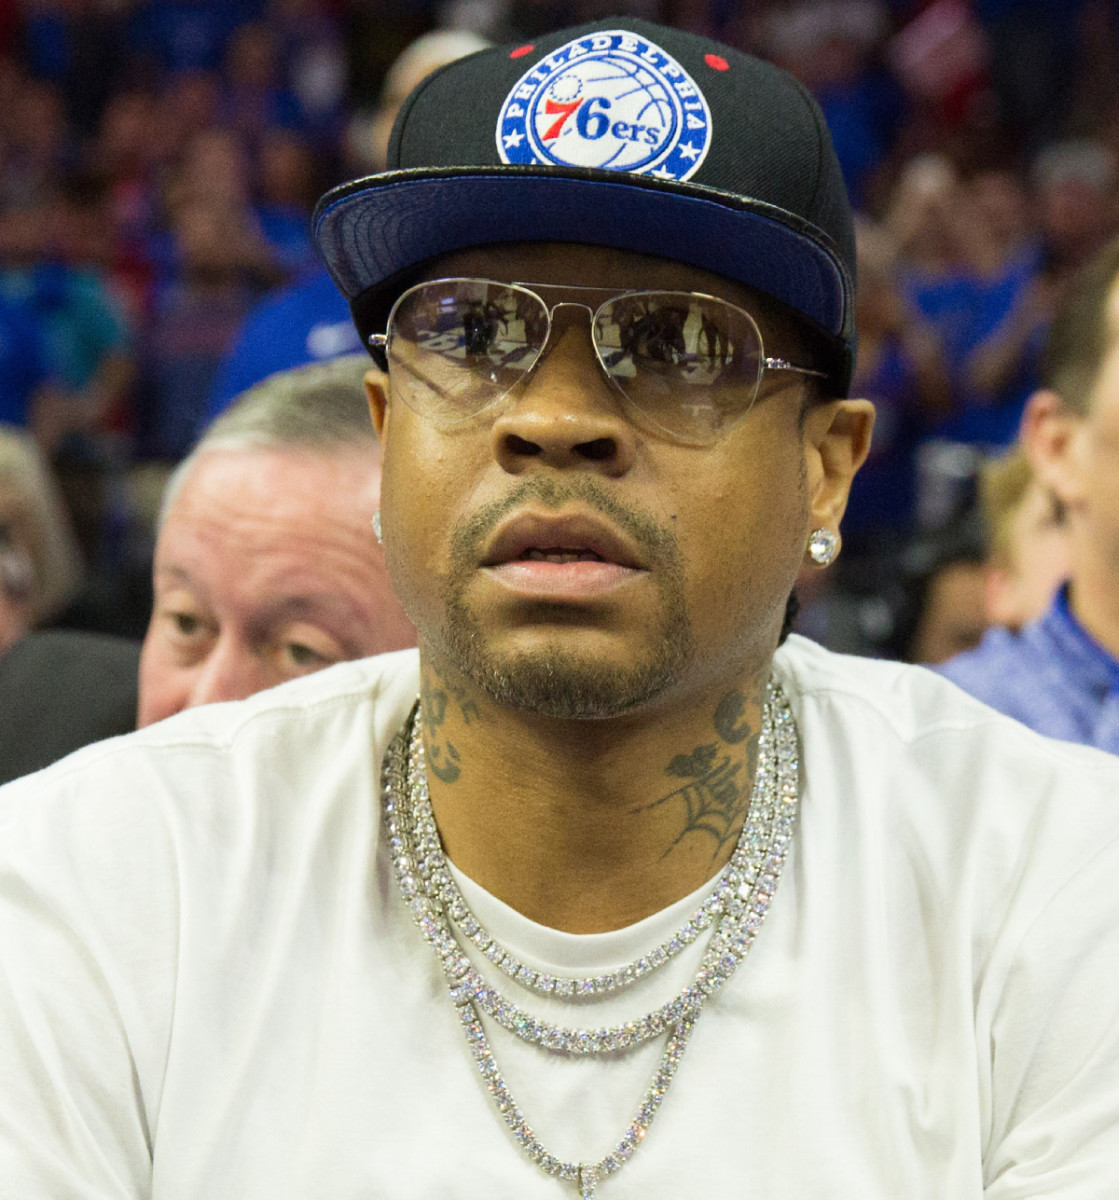 Allen Iverson Discussed His Practice Habits: "What If I Woulda Lift Weights? What If I Woulda Dedicated Myself More? But, I Did A Lot."